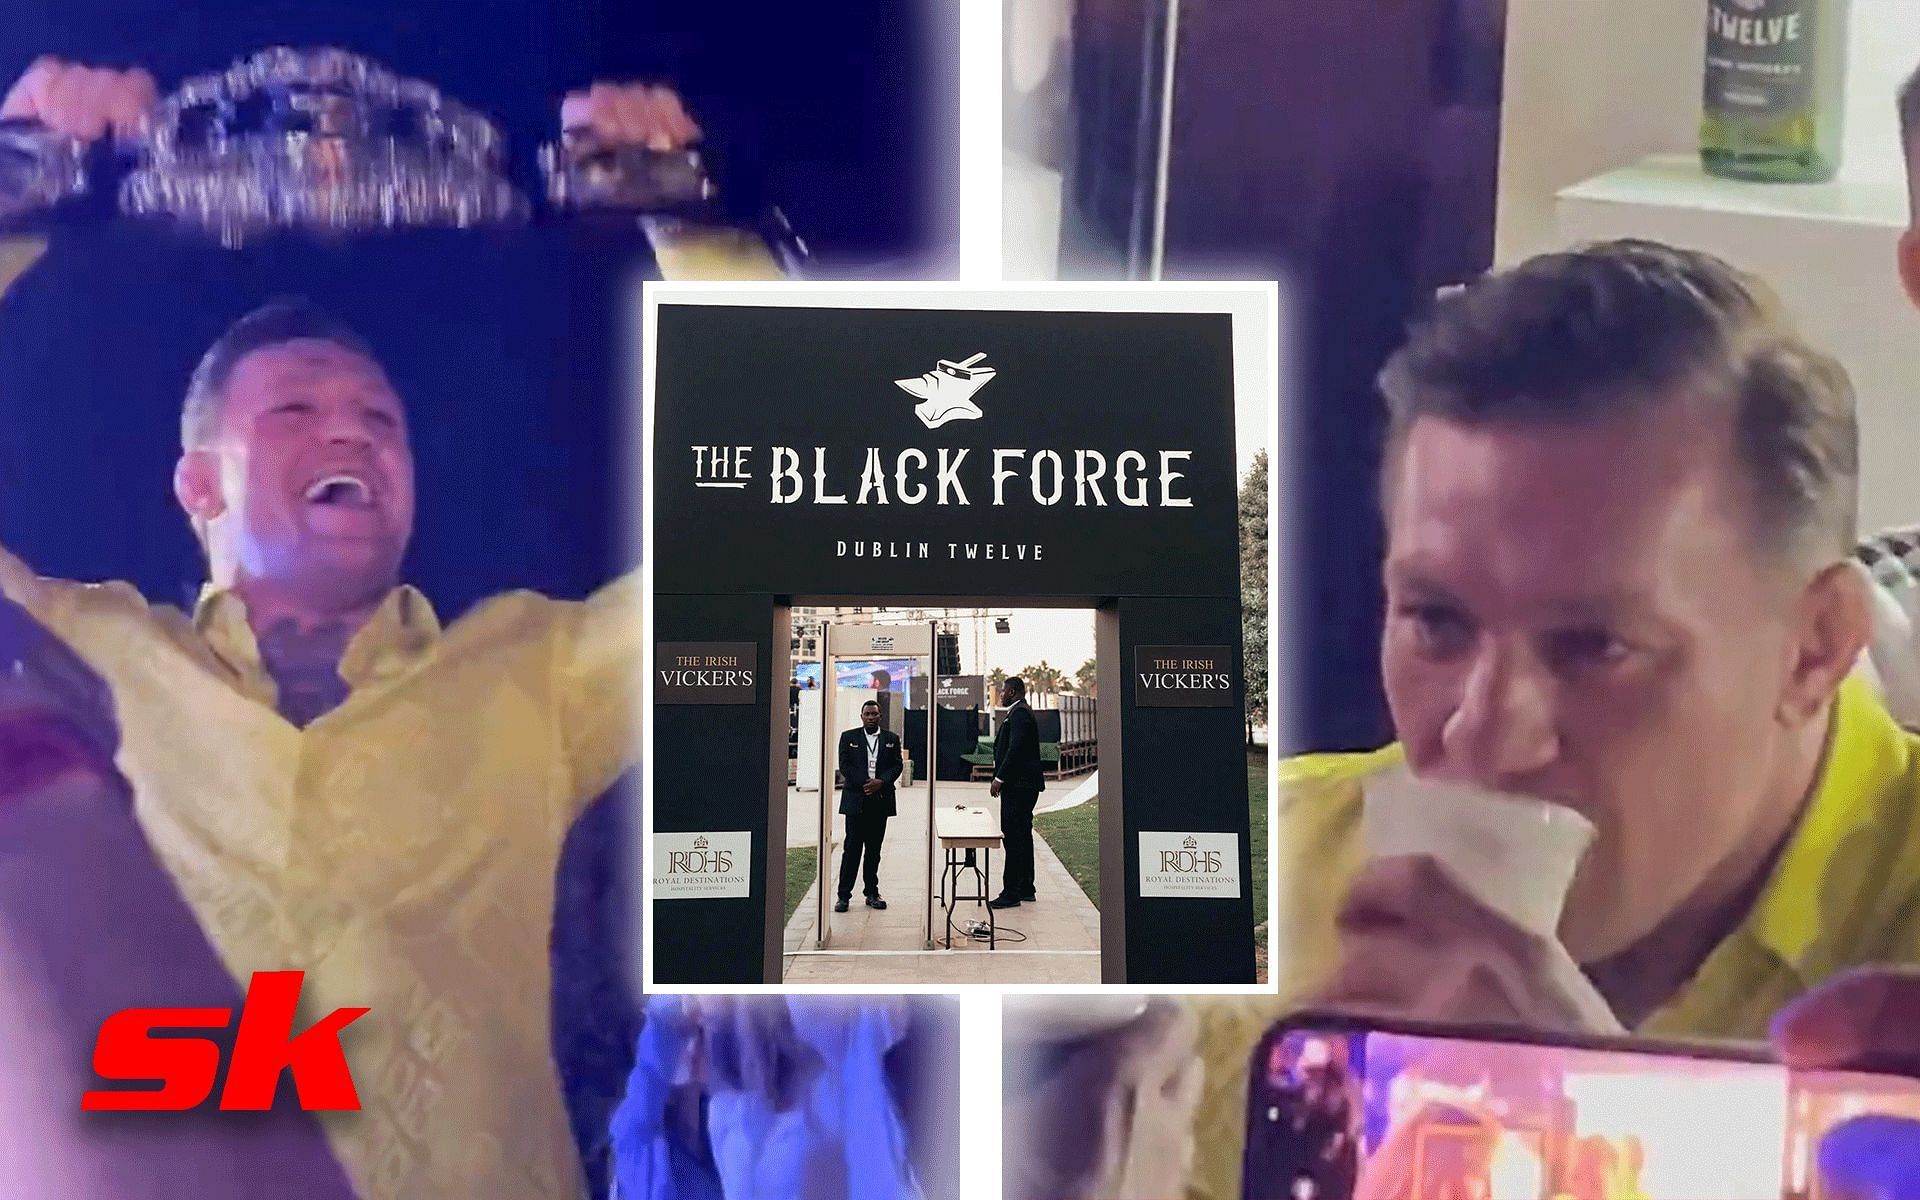 Conor McGregor was seen at The Black Forge Inn pop-up pub in Abu Dhabi [Image credits: @theblackforgeinn on Instagram and @Fullcombat_ on Twitter]